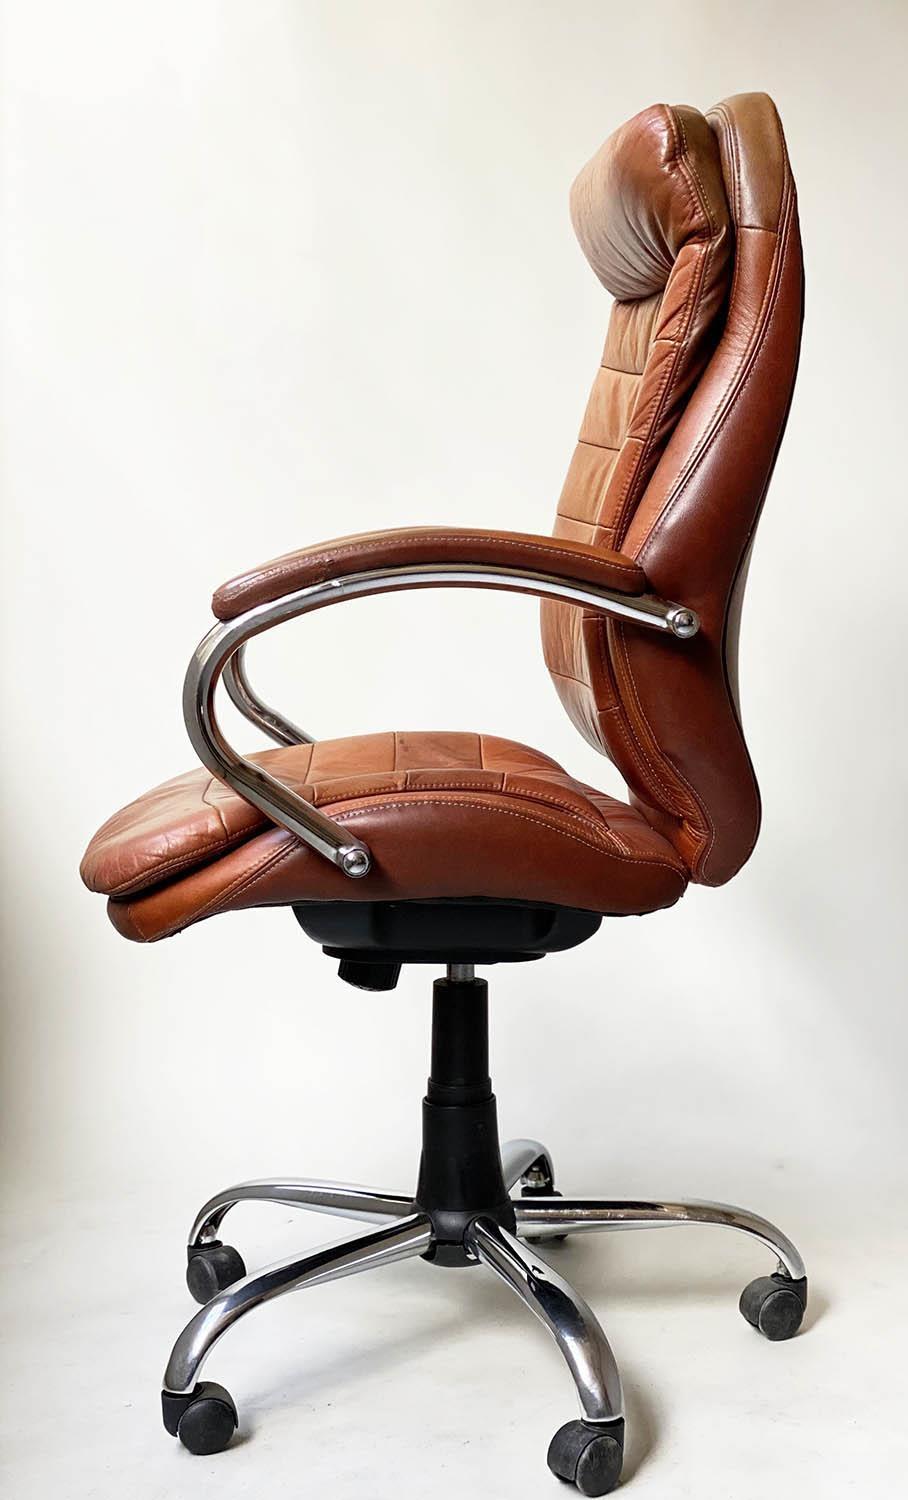 REVOLVING AND RECLINING DESK CHAIR, 1970's, stitched tan leather, on a djustable base, with castors, - Image 7 of 7